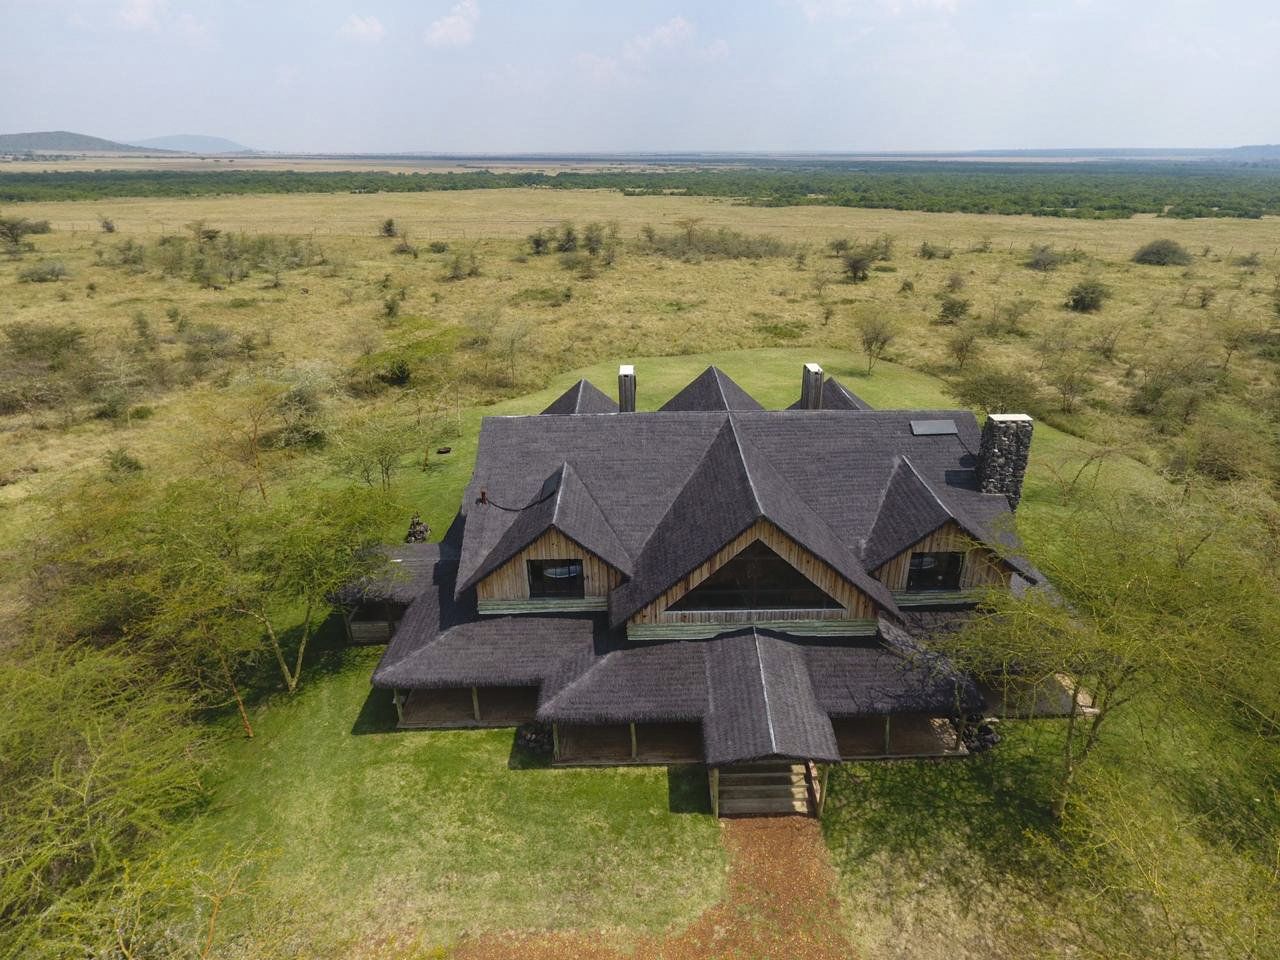 House On The Serengeti - Africa view